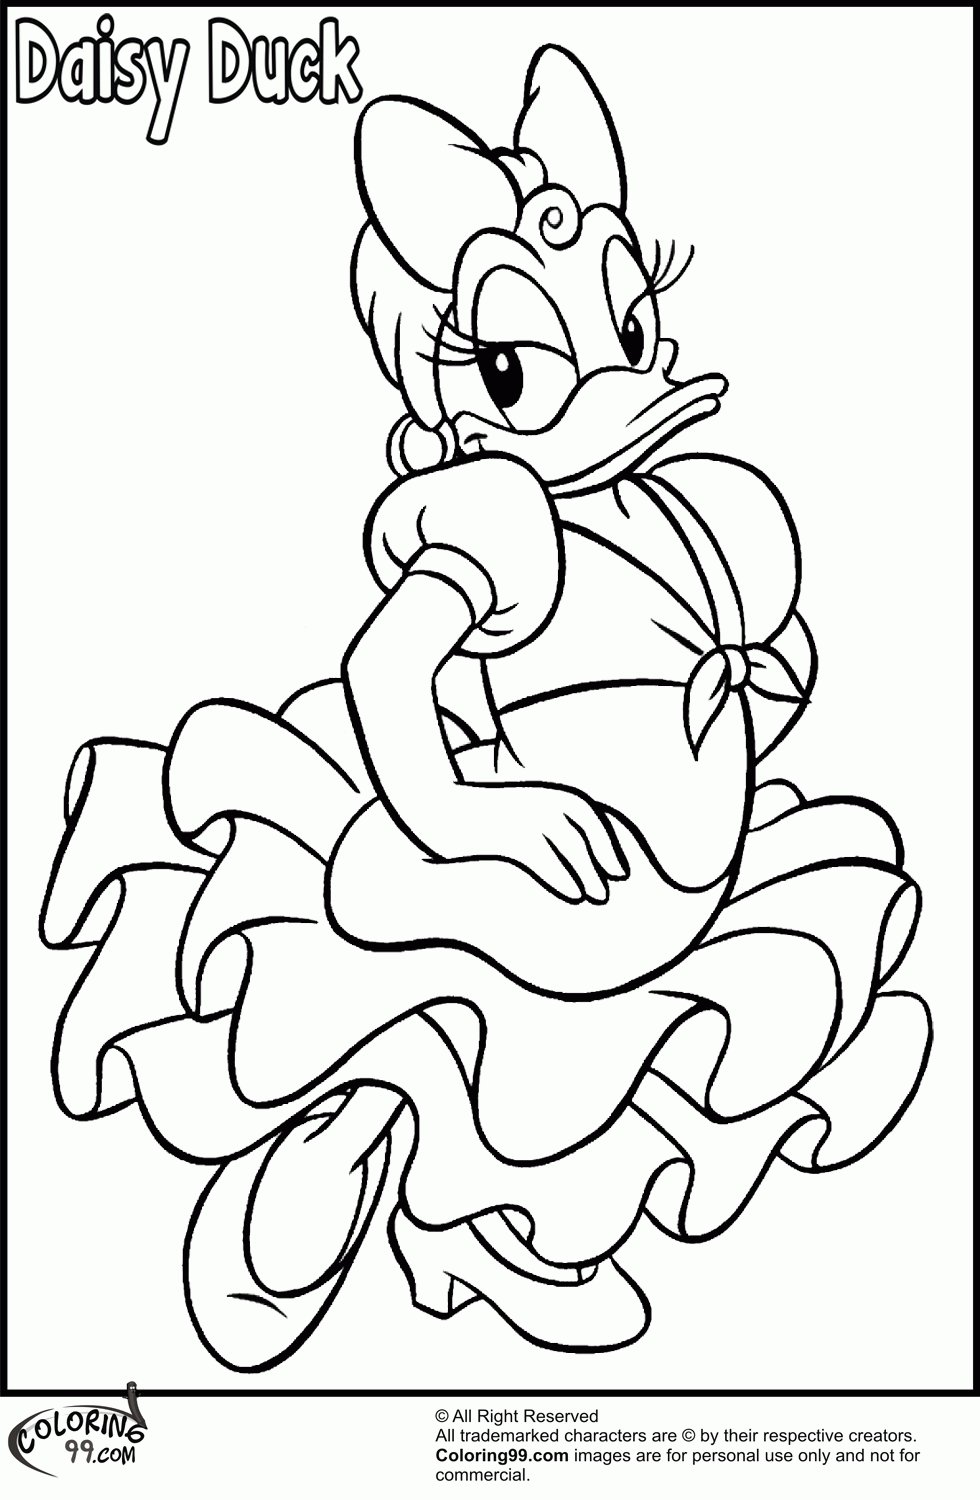 Daisy Duck Coloring Pages | Minister Coloring